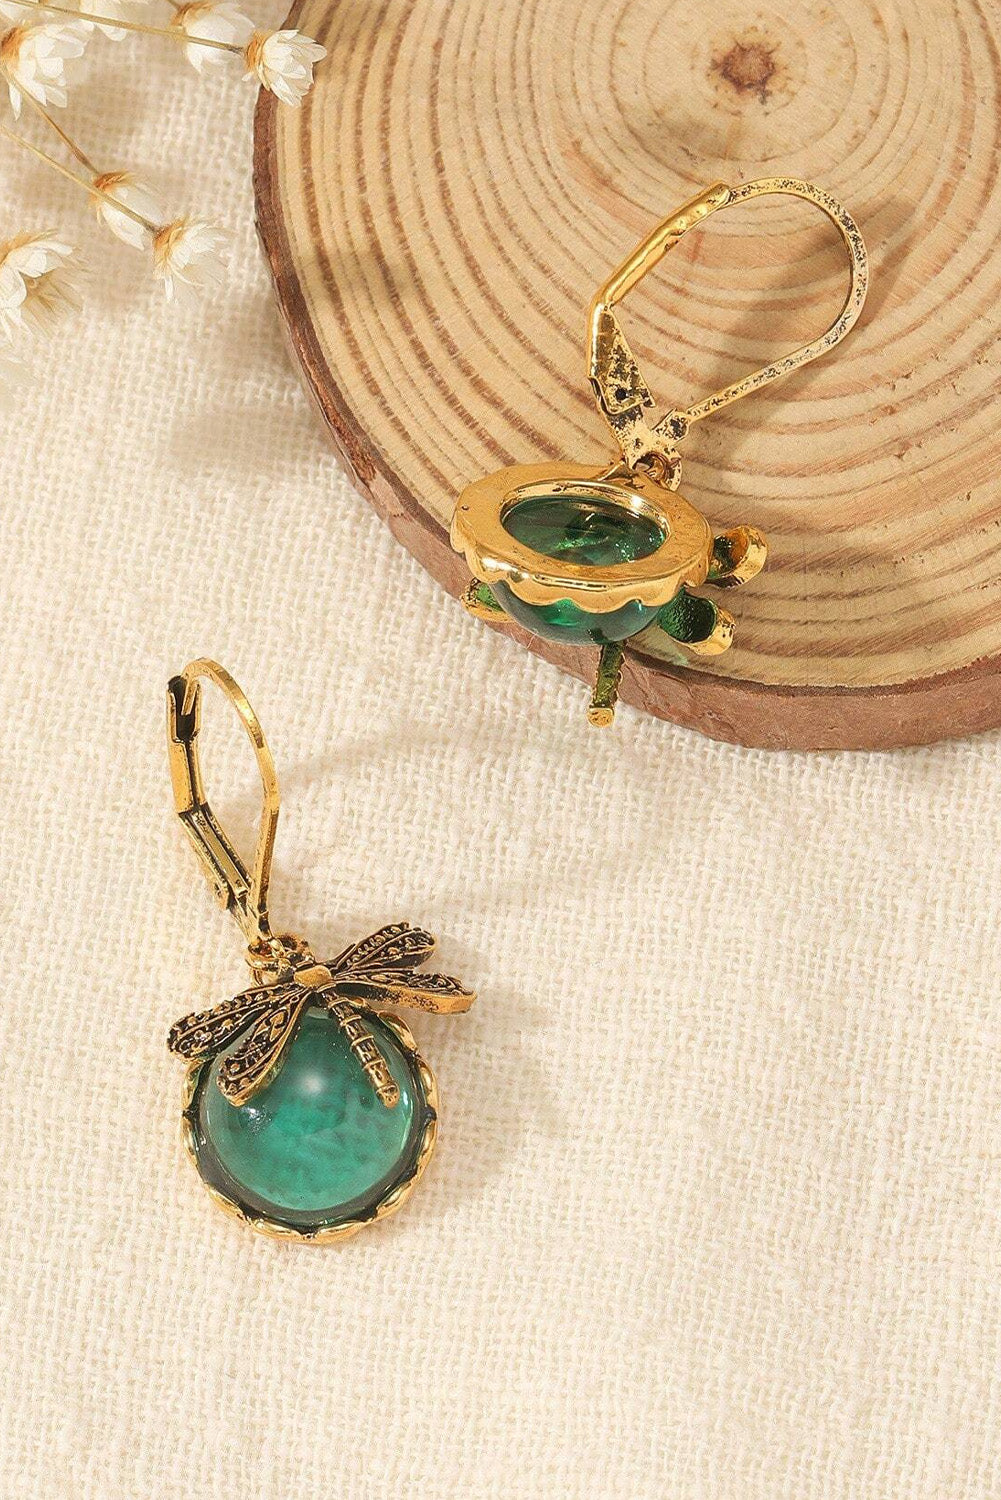 Grass Green Vintage Dragonfly Crystal Pendant Earrings Jewelry JT's Designer Fashion